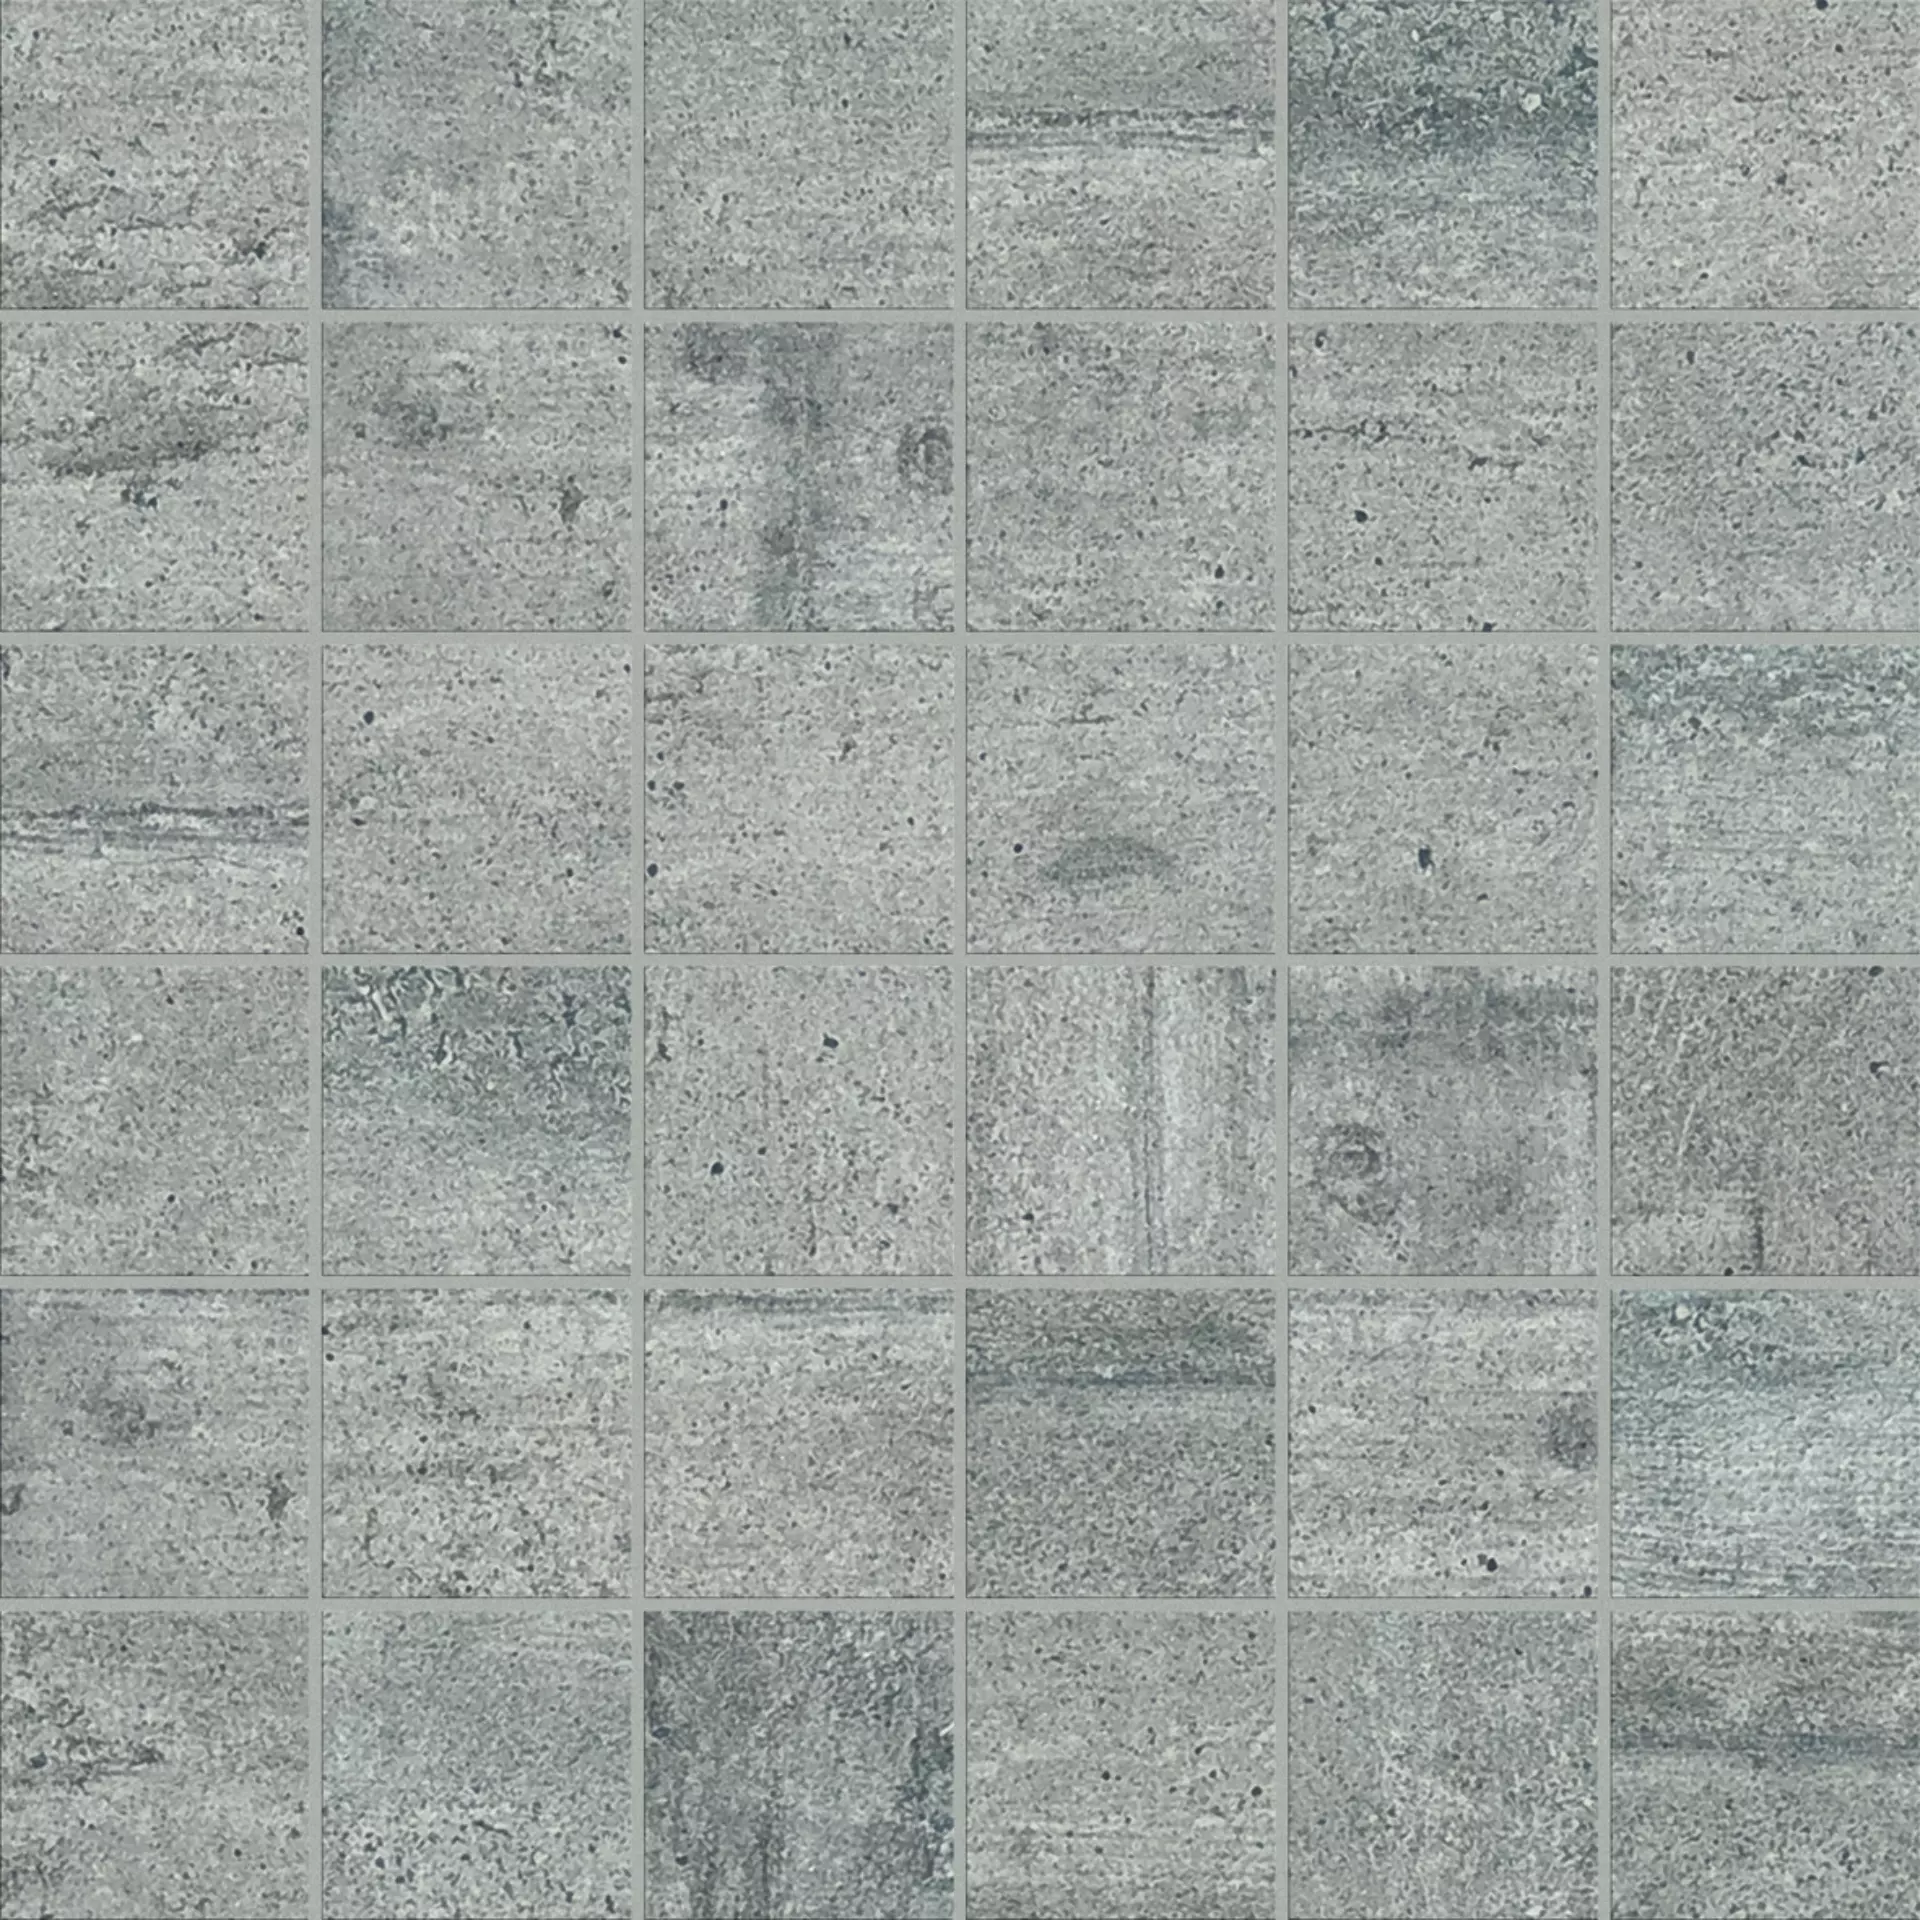 Provenza Re-Use Malta Grey Naturale Mosaic 4,8x4,8 E1R2 30x30cm rectified 9,5mm